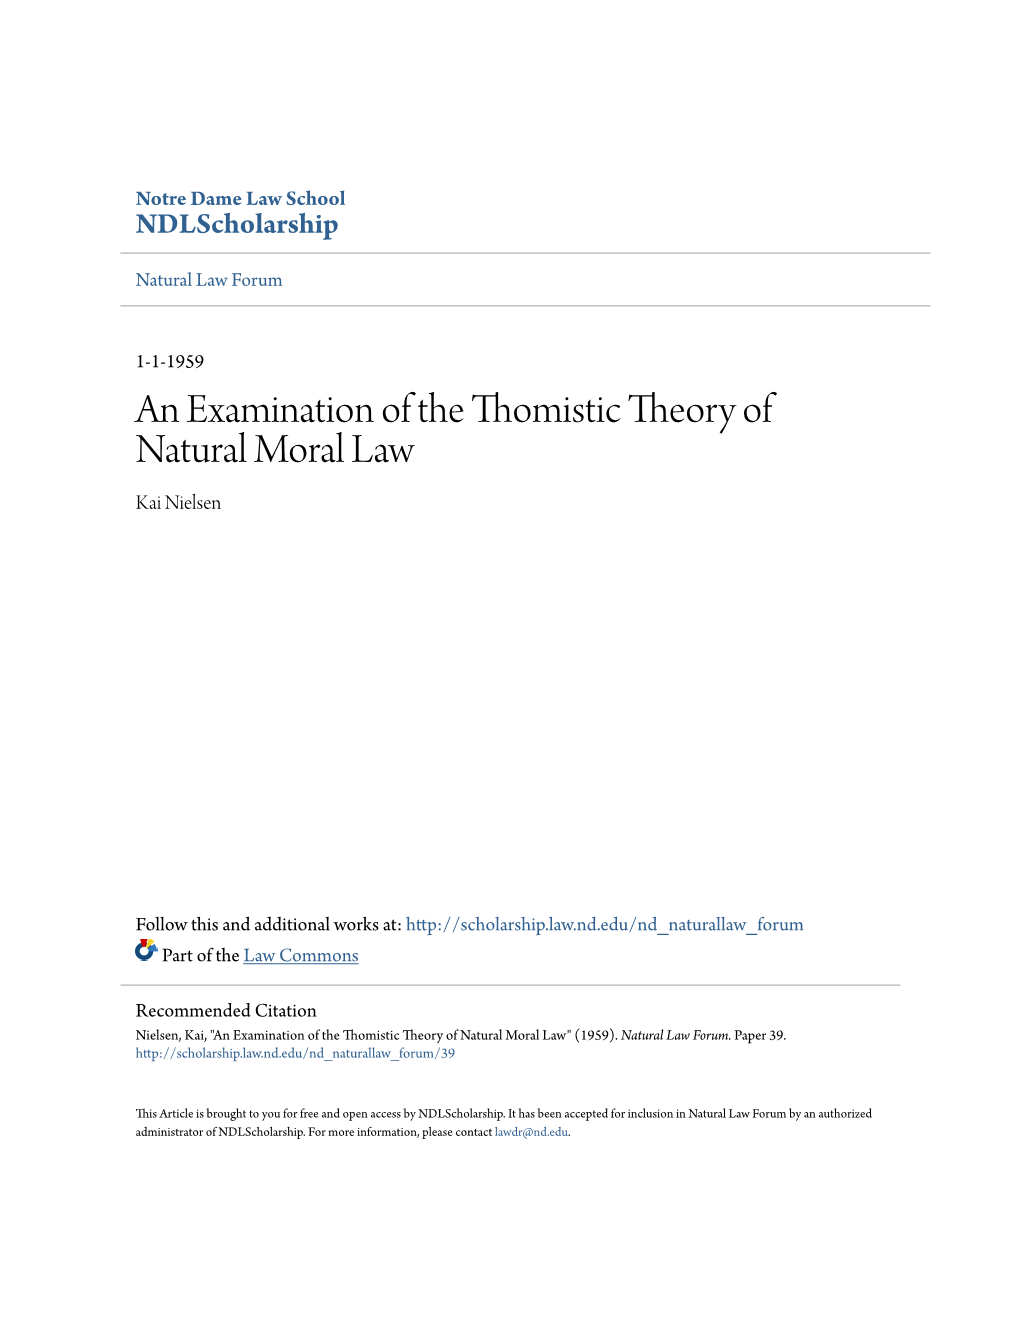 An Examination of the Thomistic Theory of Natural Moral Law Kai Nielsen